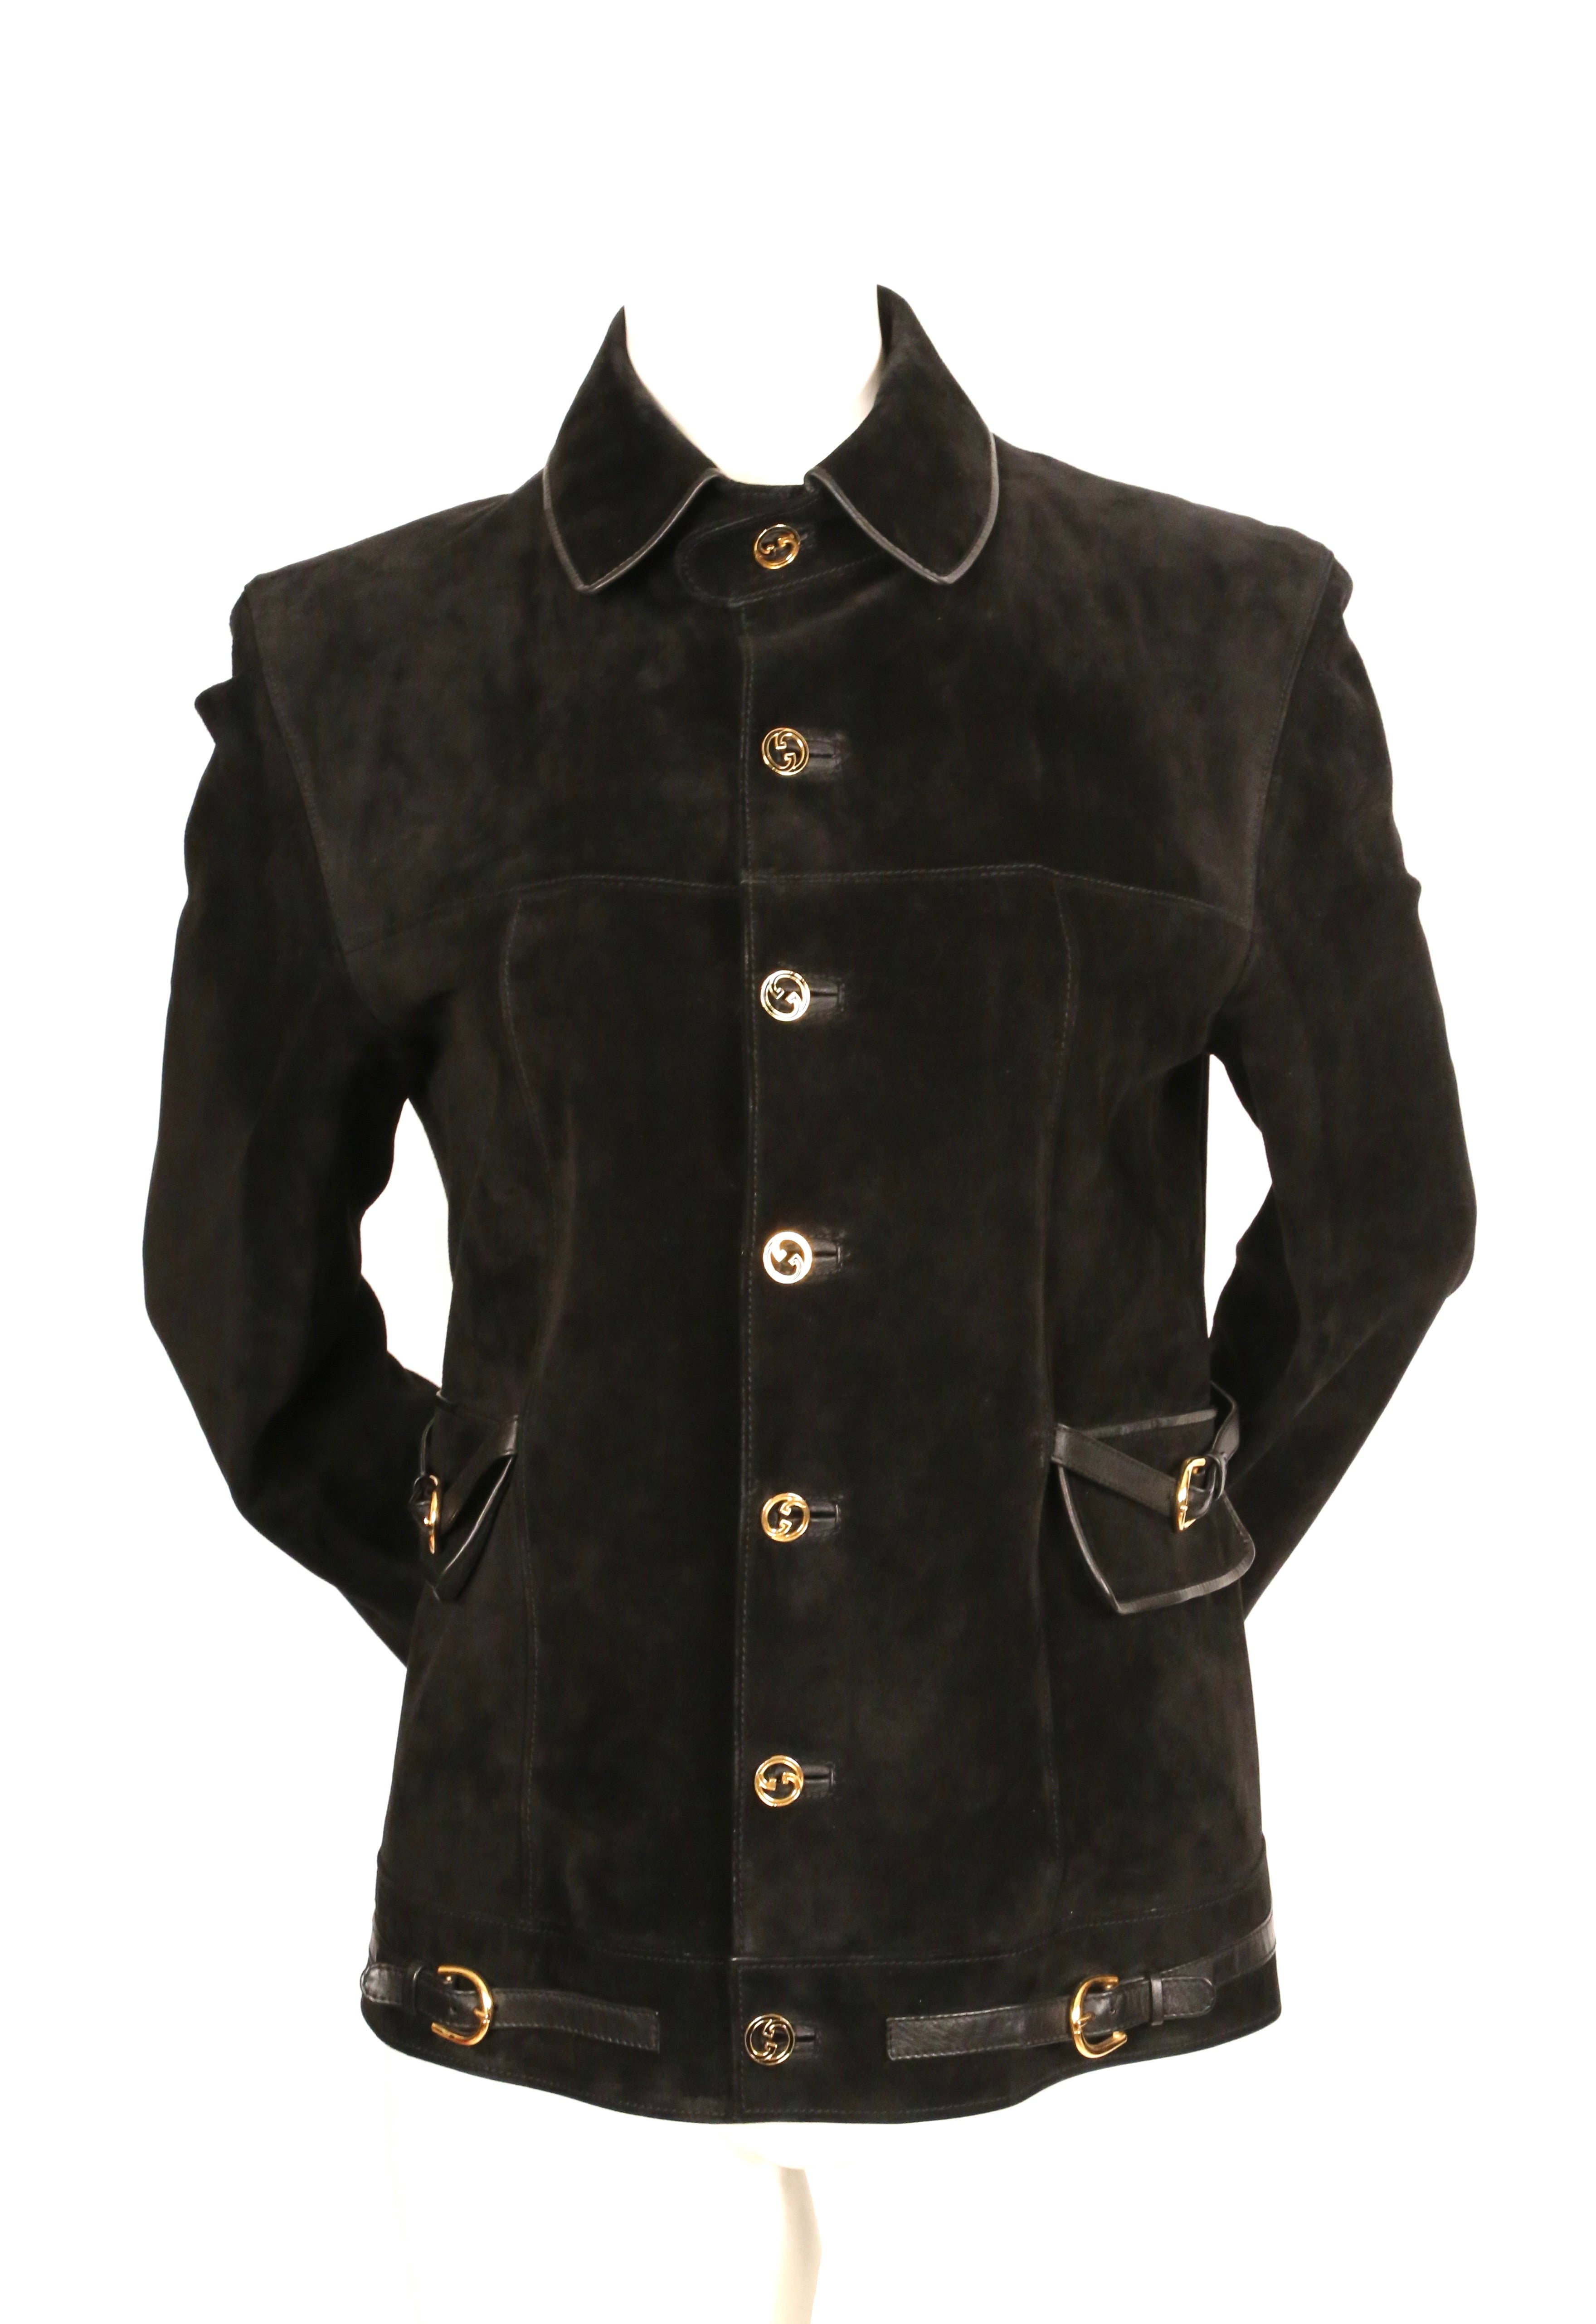 1970's GUCCI black suede jacket with gilt hardware and buckles